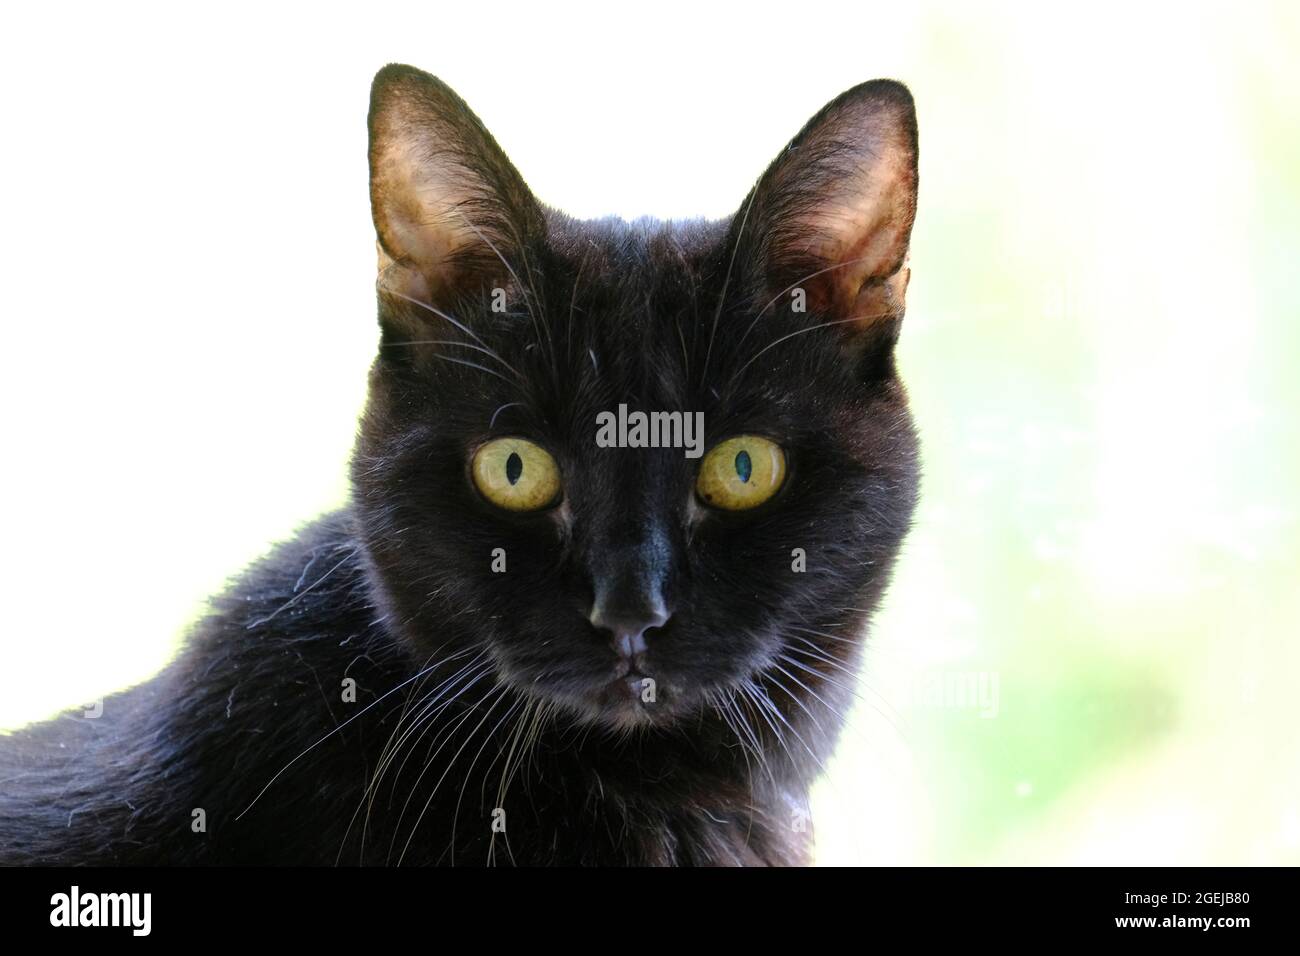 Elderly adult black cat (Felis catus) looking directly at the camera Stock Photo